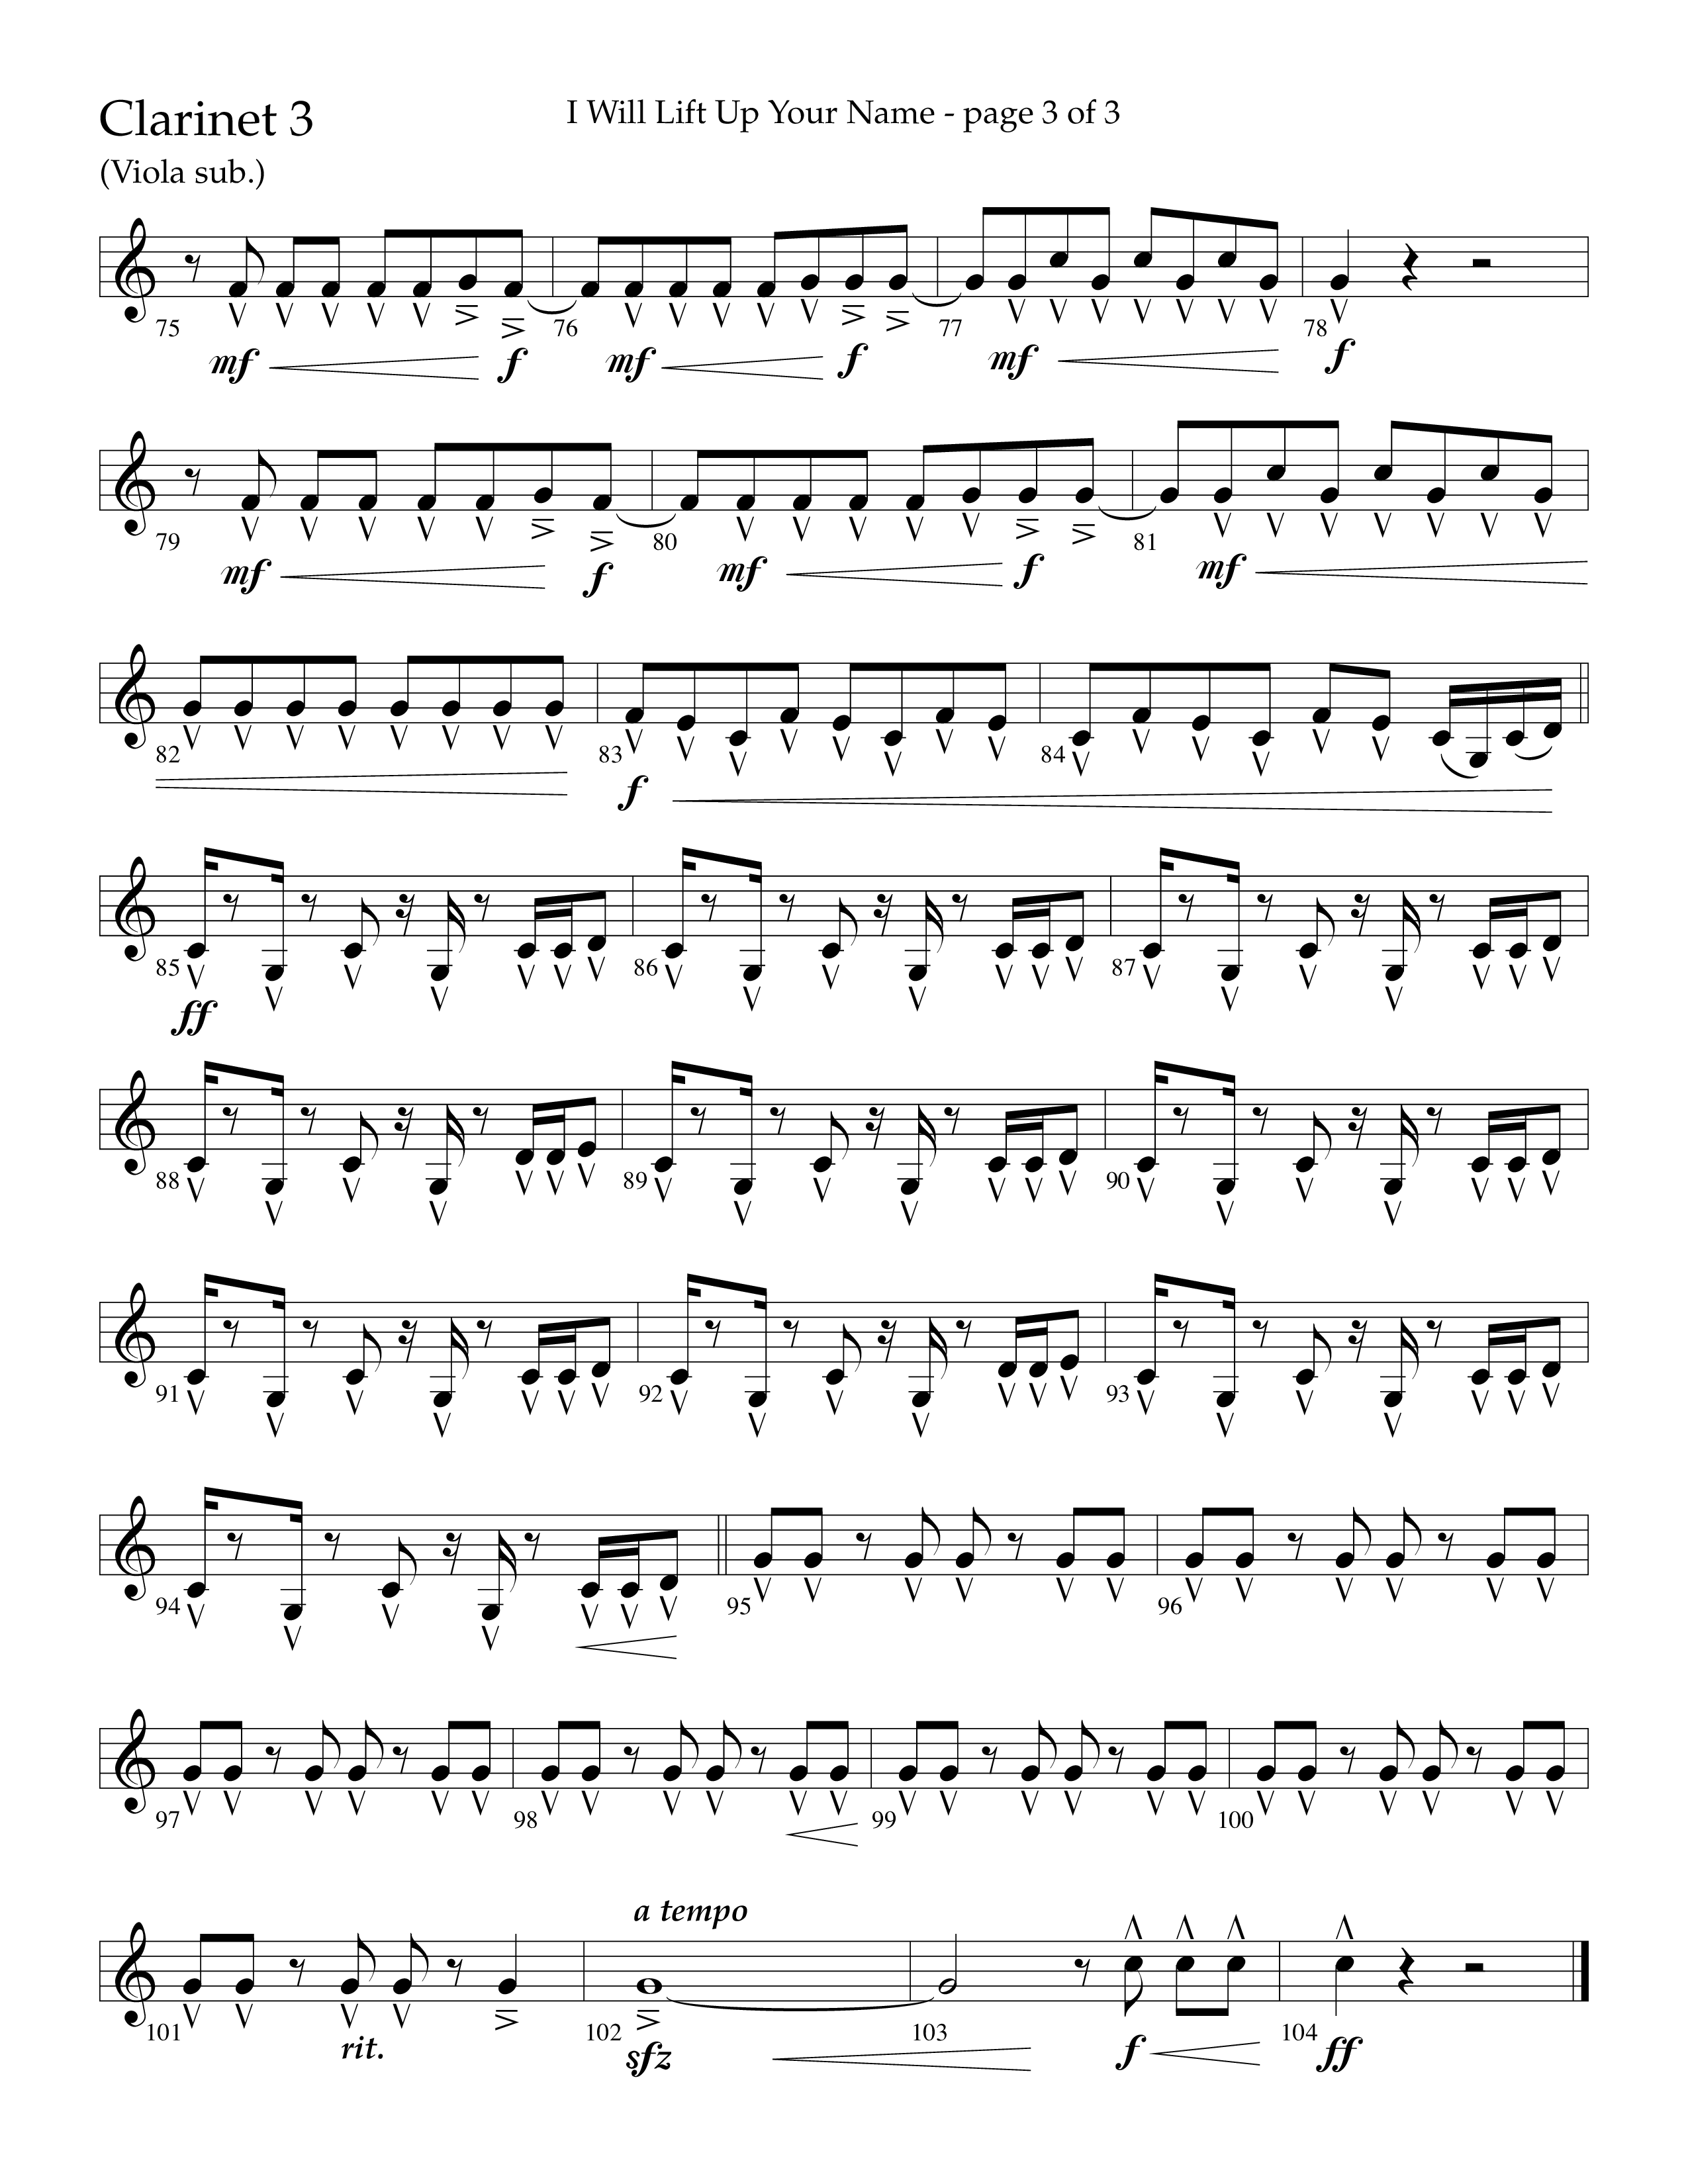 I Will Lift Up Your Name (Choral Anthem SATB) Clarinet 3 (Lifeway Choral / Arr. John Bolin / Orch. Cliff Duren)